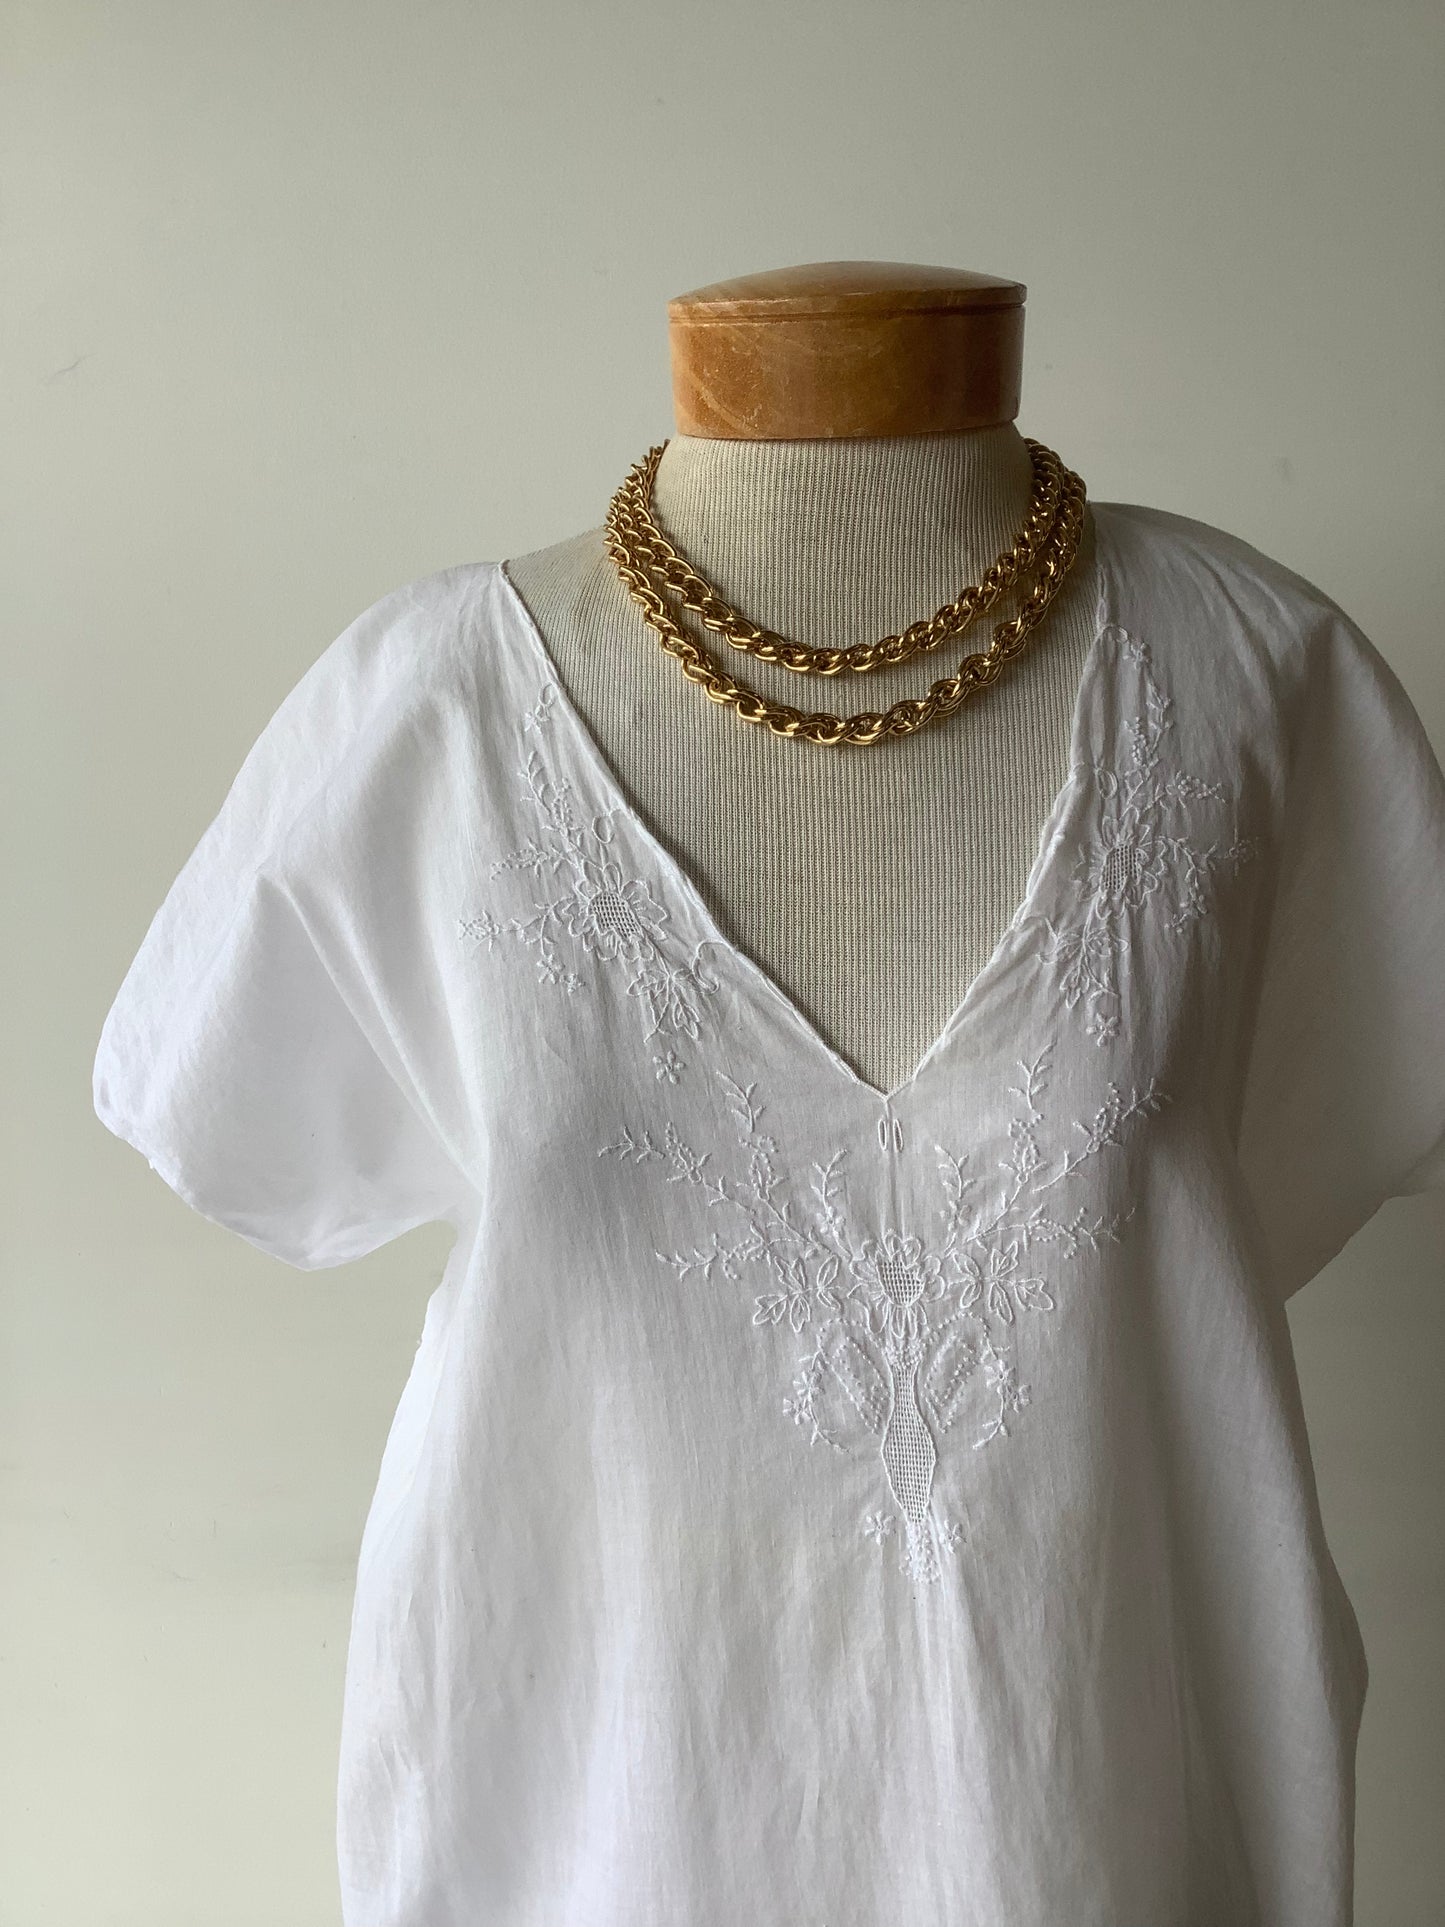 Antique embroidered nightgown